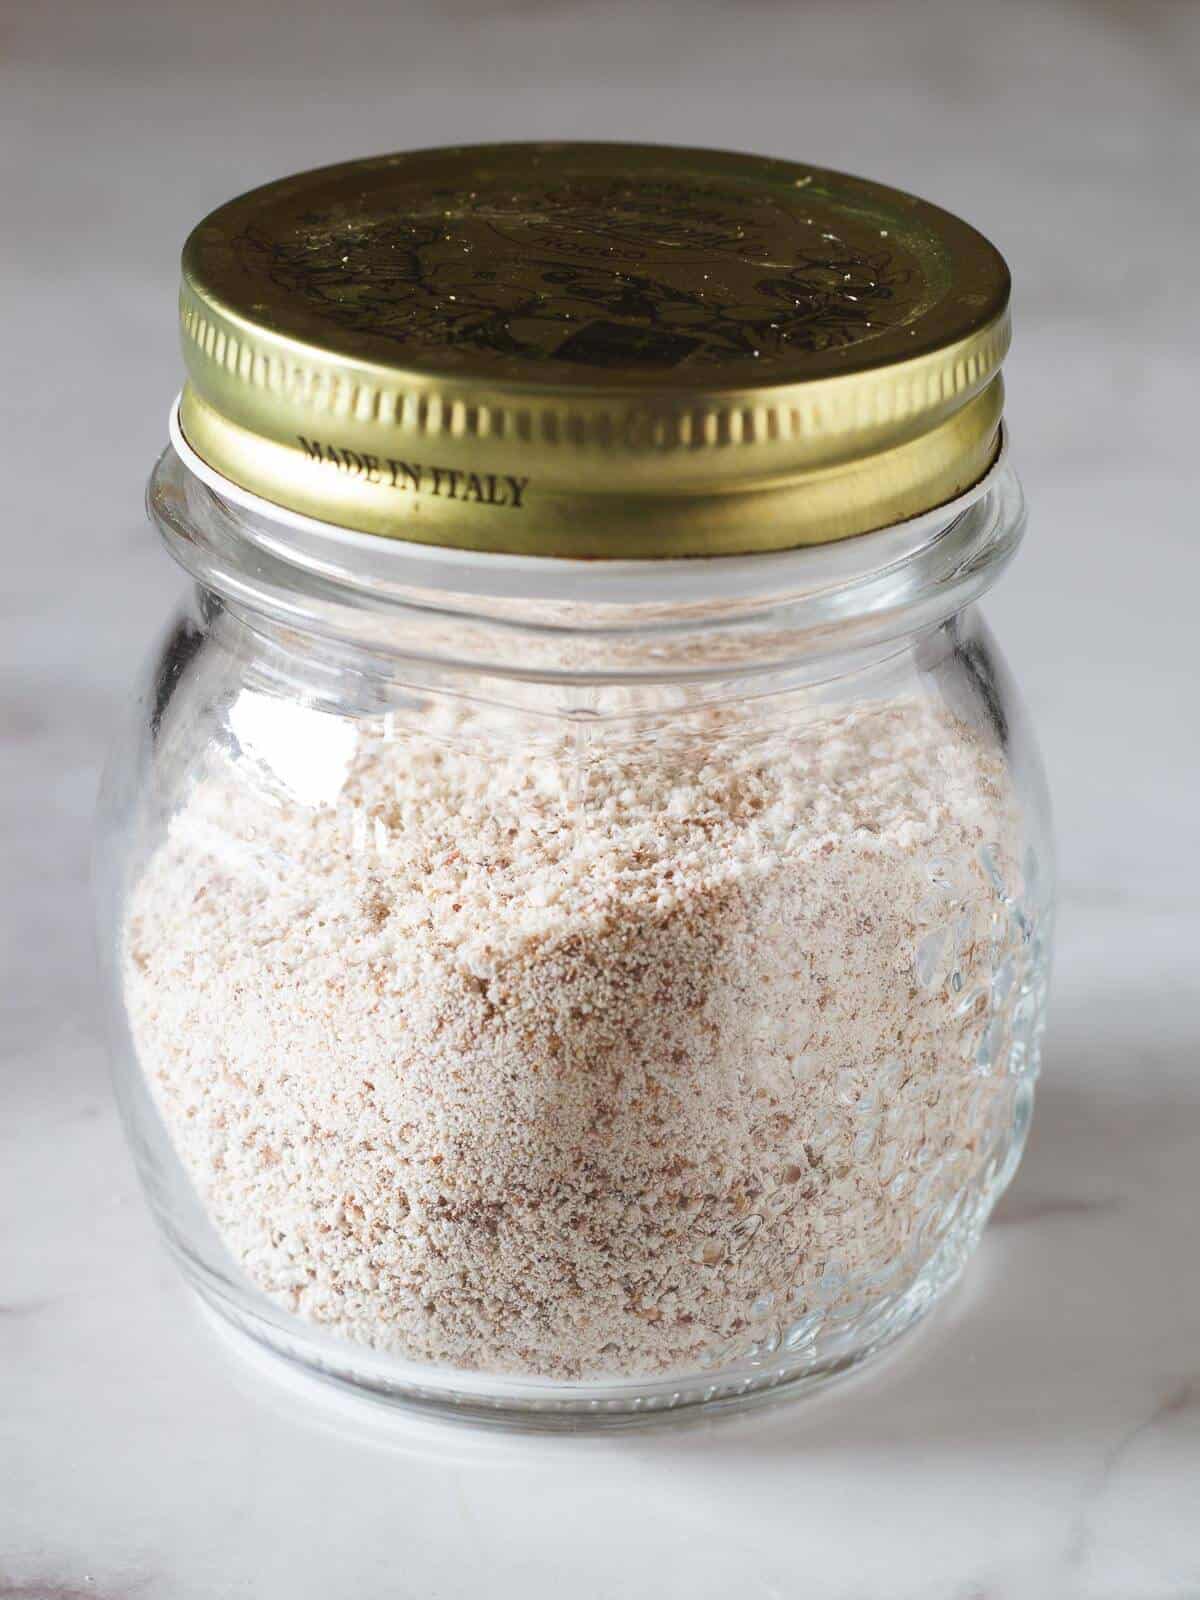 storing almond meal in an airtight glass container